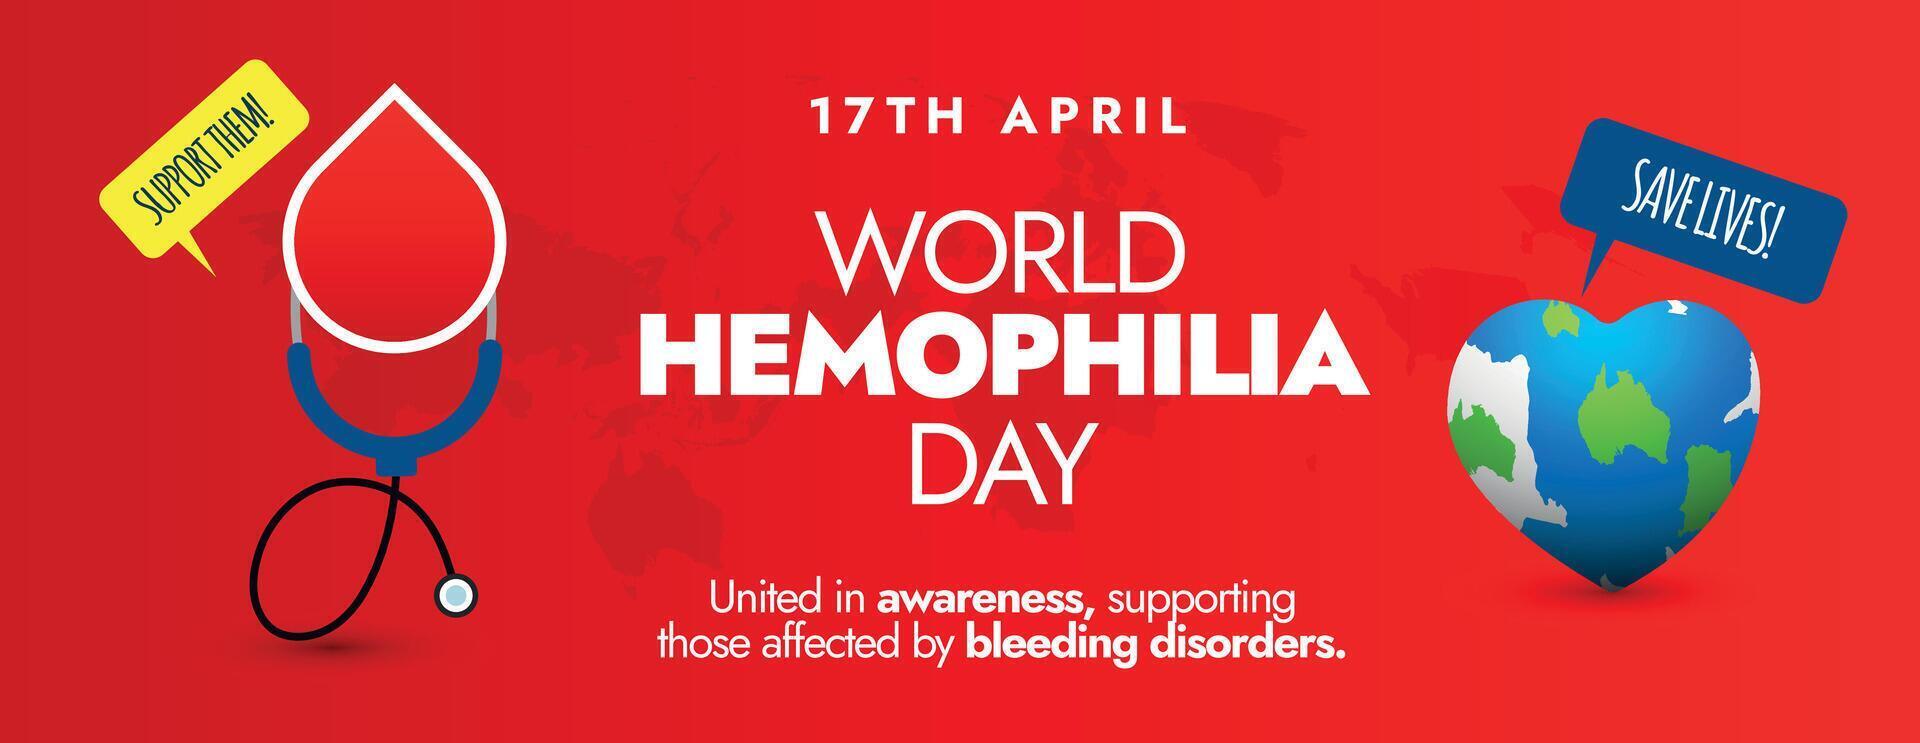 World Haemophilia day.17th April World Haemophilia day cover banner in red background with stethoscope, blood droop, earth globe in heart shape. Donate blood to patients with bleeding disorders. vector